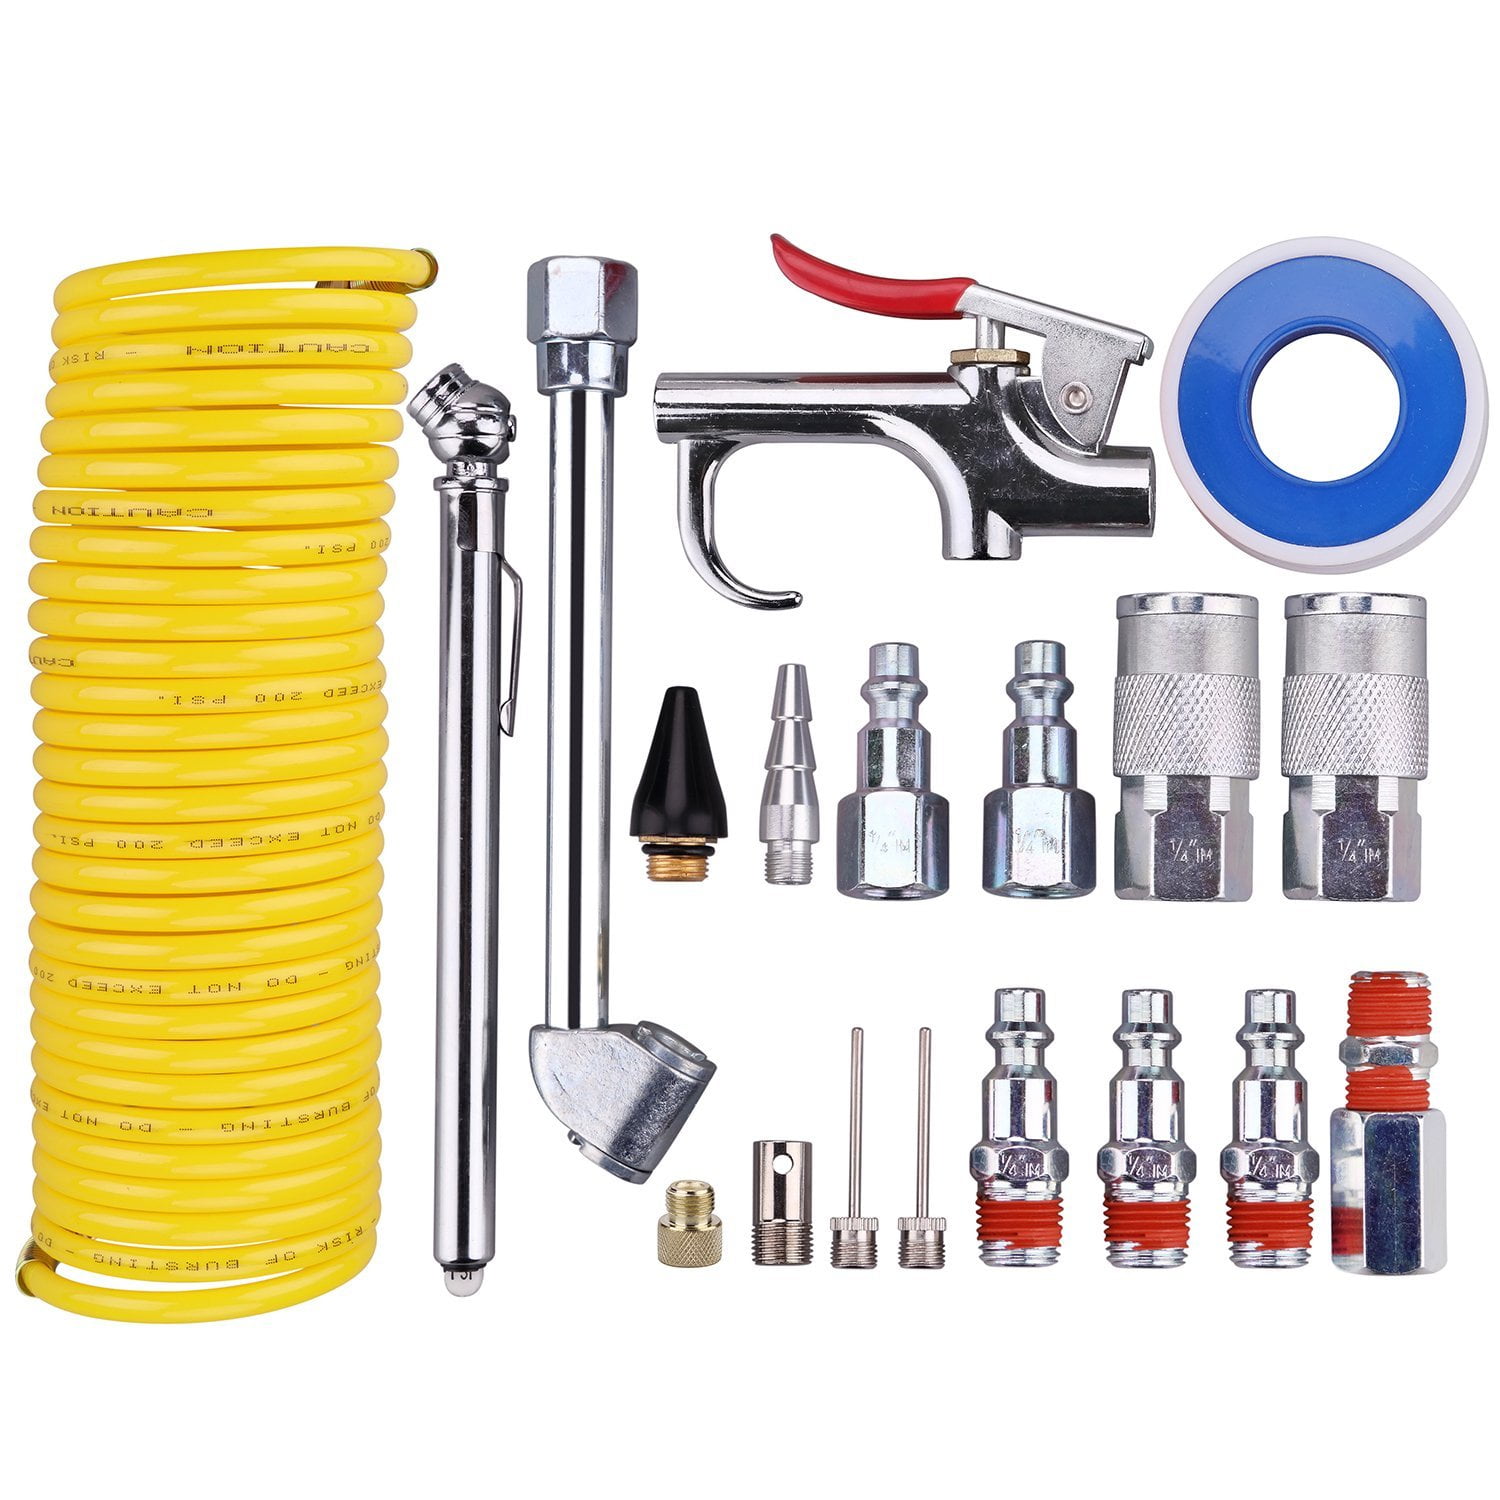 20-Pack Air Compressor Accessory Kit 25-foot Recoil Air Hose